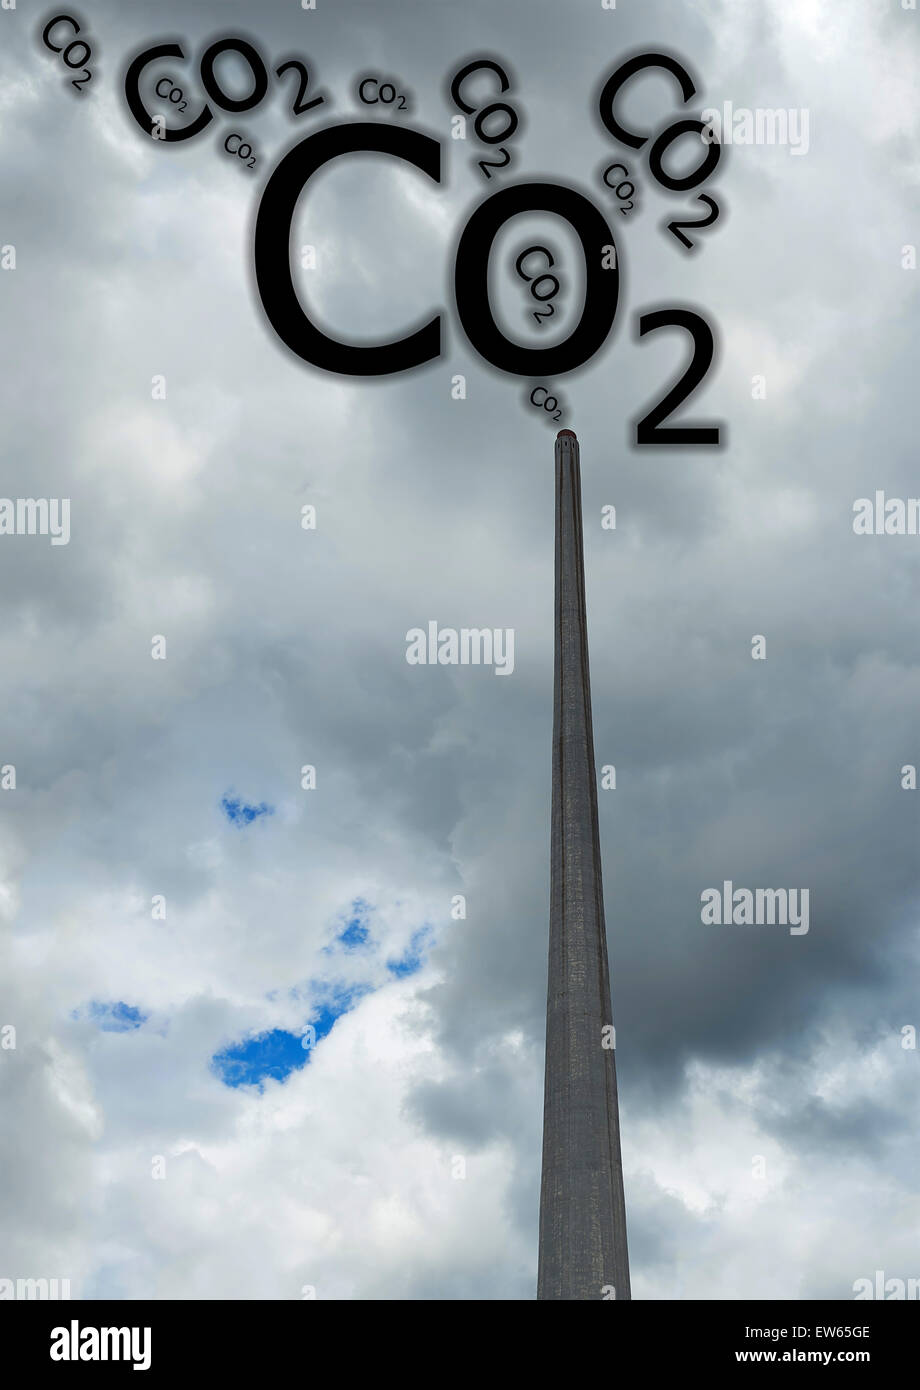 Industrial chimney with a Co2 pollution. Stock Photo